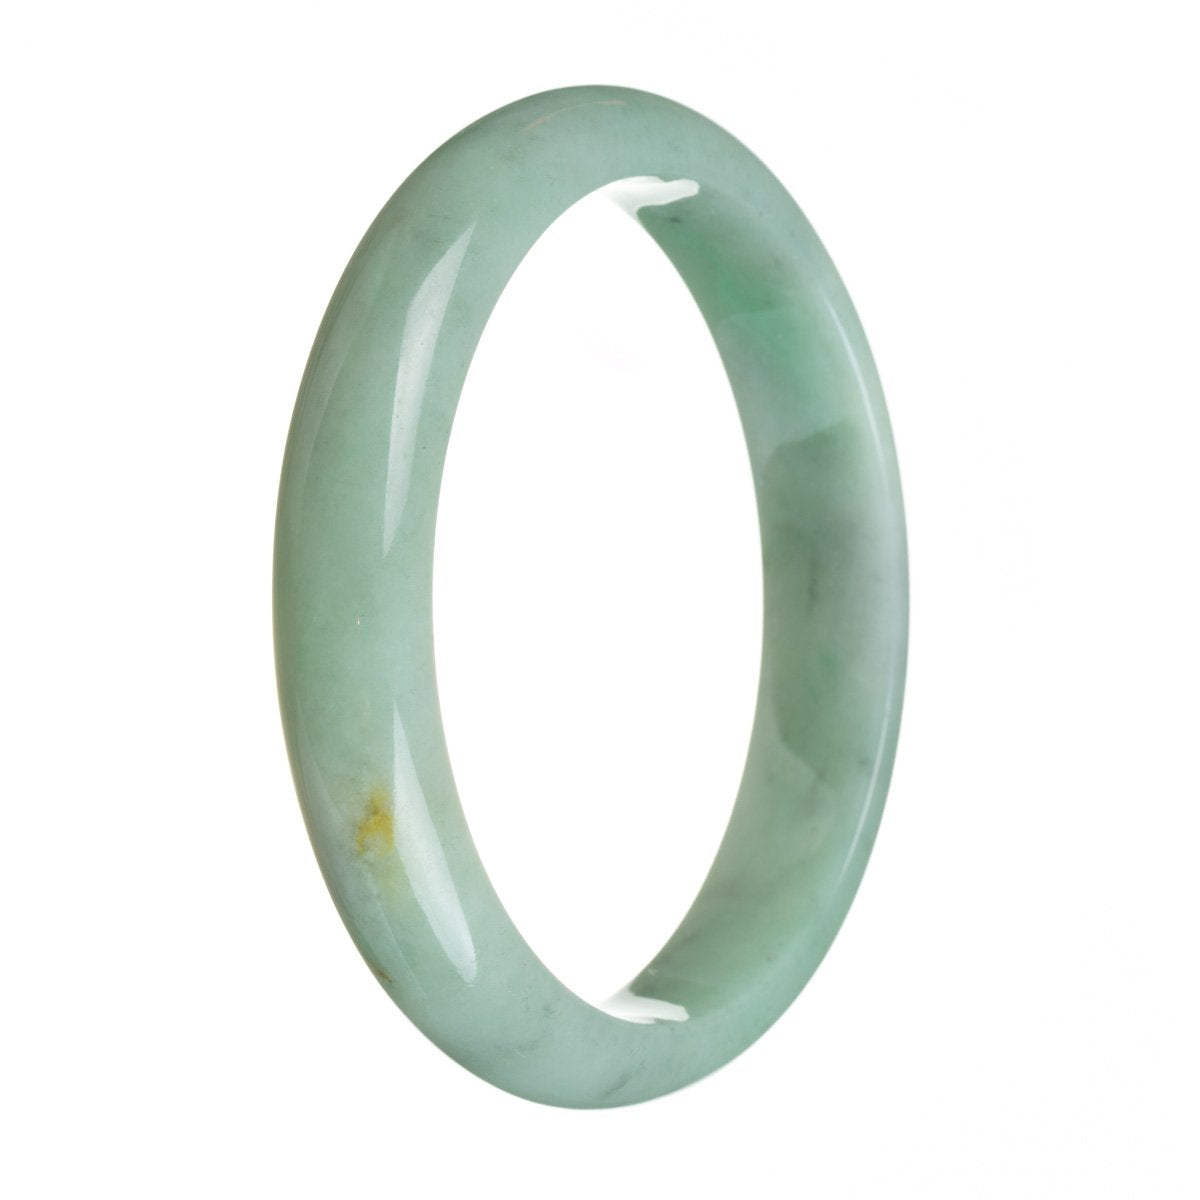 A close-up photo of an elegant light green jade bangle bracelet with a half-moon shape. The bracelet is made from Grade A authentic jadeite jade and measures 83mm in diameter. It is a beautifully crafted piece of jewelry by MAYS™.